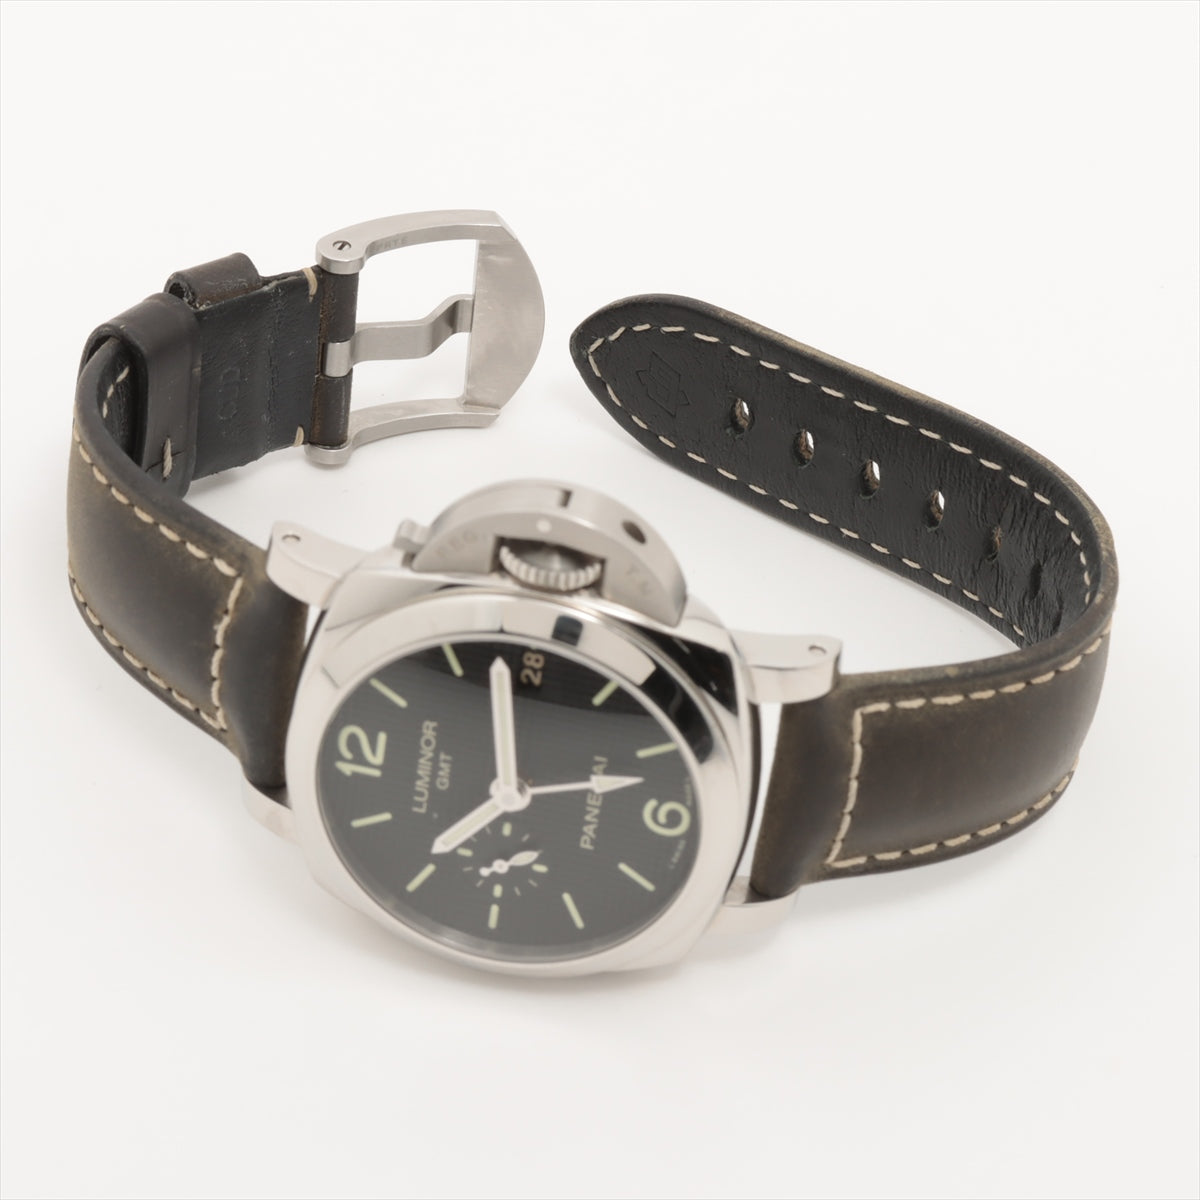 Panerai Luminor 1950 3 DAYS GMT Automatic Acciaio PAM00535 SS & Leather AT Black-Face